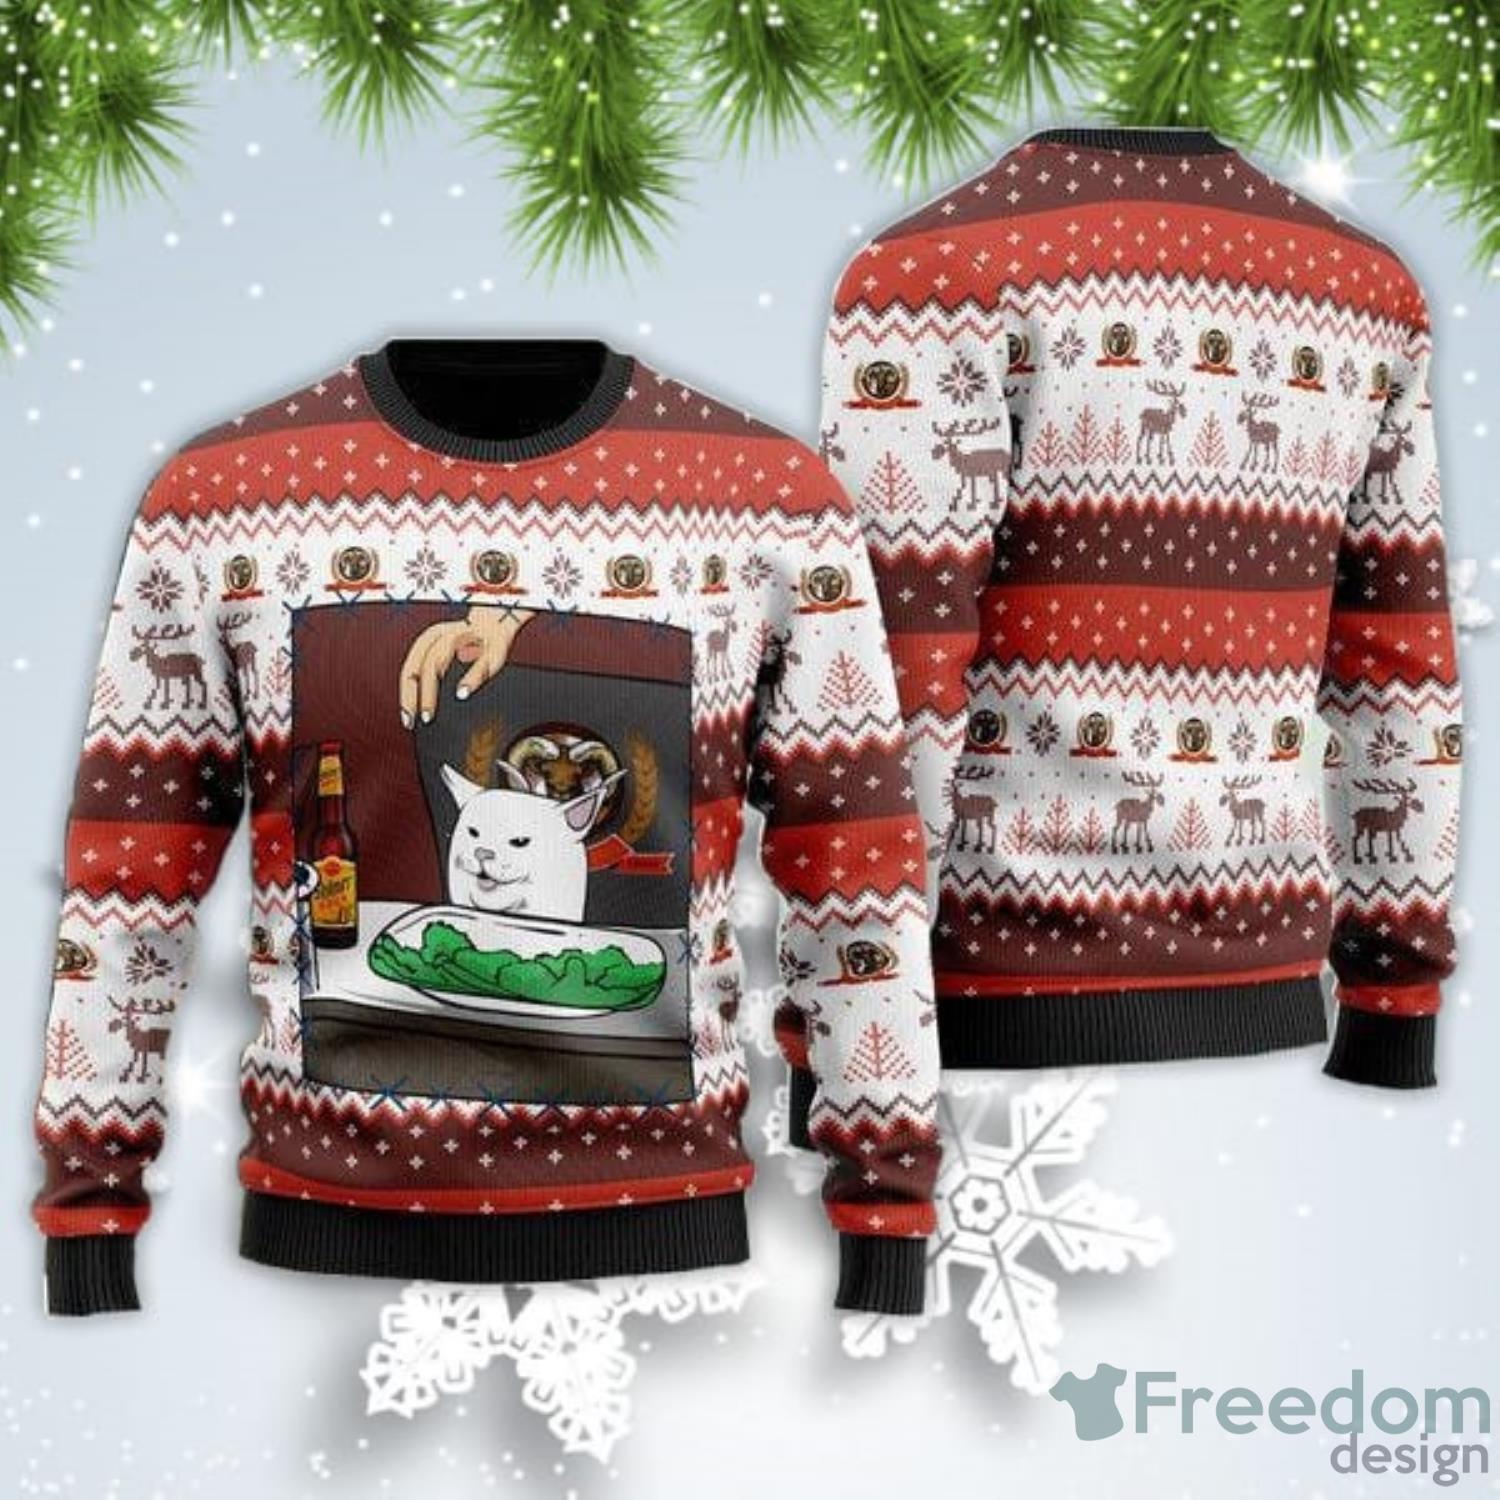 Los Angeles Dodgers Merry Christmas Snowflake Ugly Christmas Sweater -  Freedomdesign